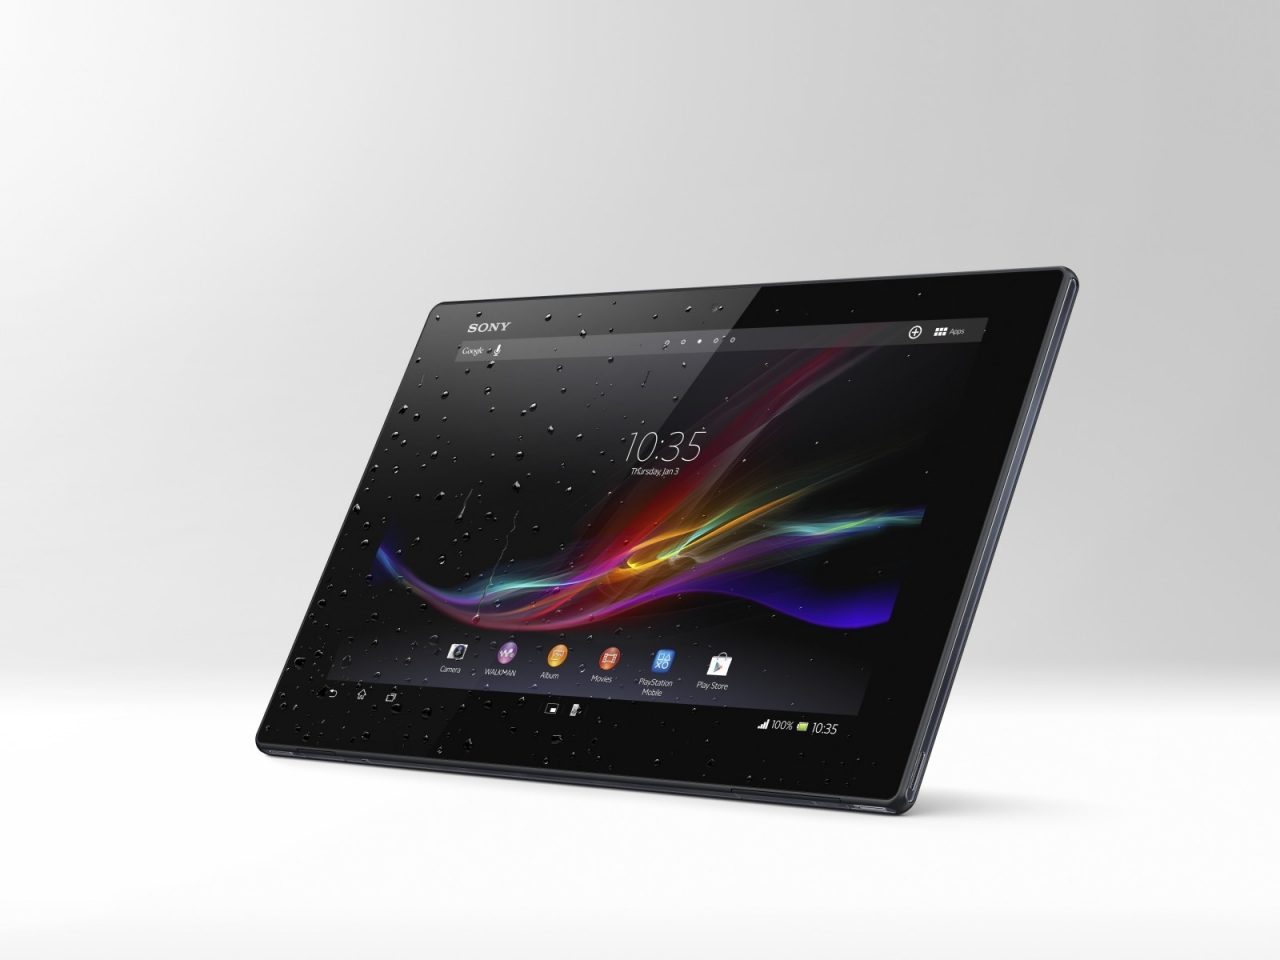 New Sony Xperia Z Tablet for 1280 x 960 resolution